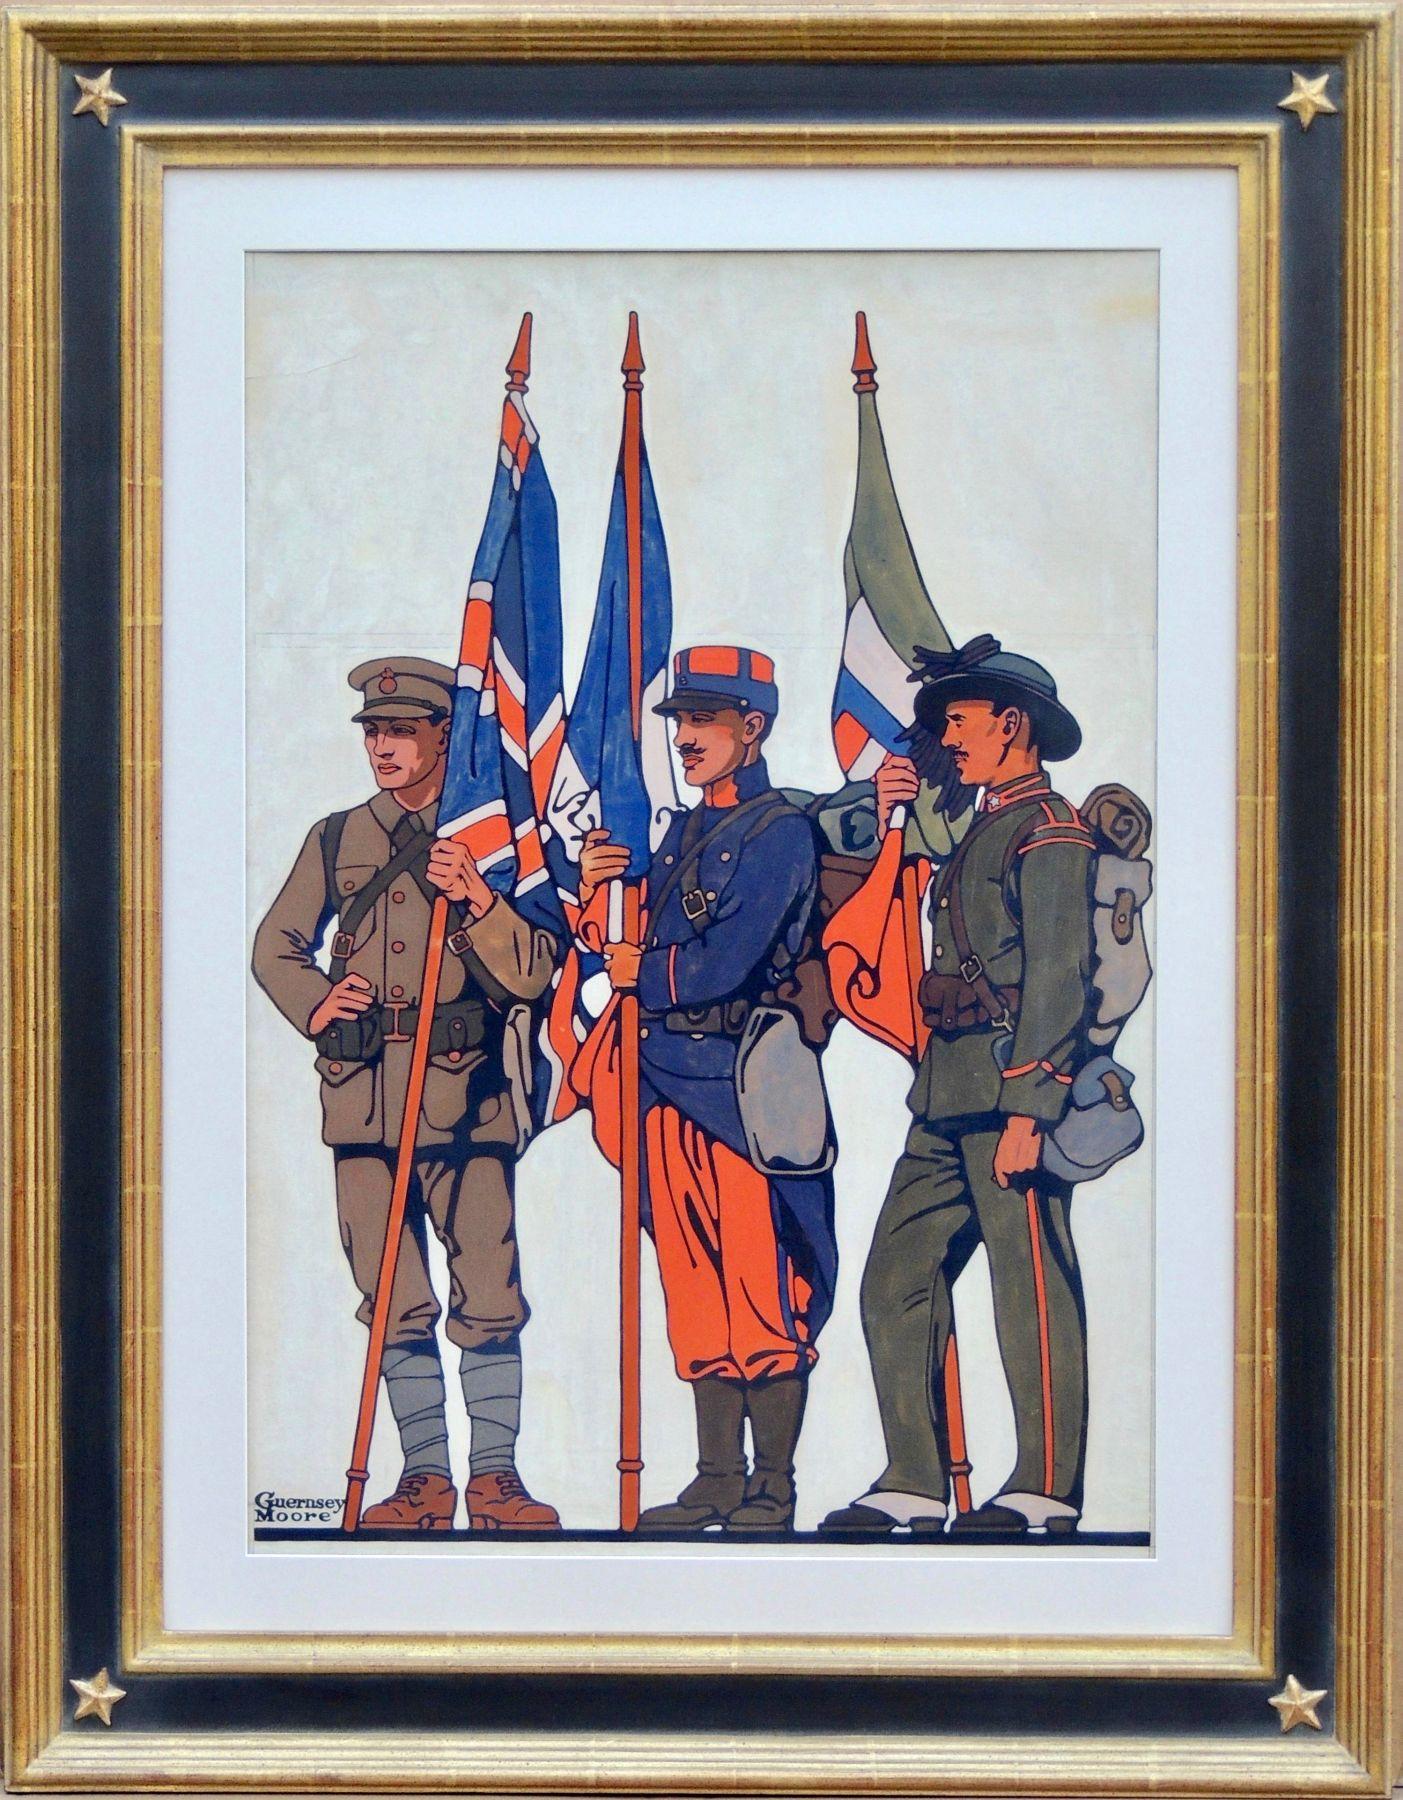 Saturday Evening Post Cover, August 21, 1915 - Painting by Guernsey Moore